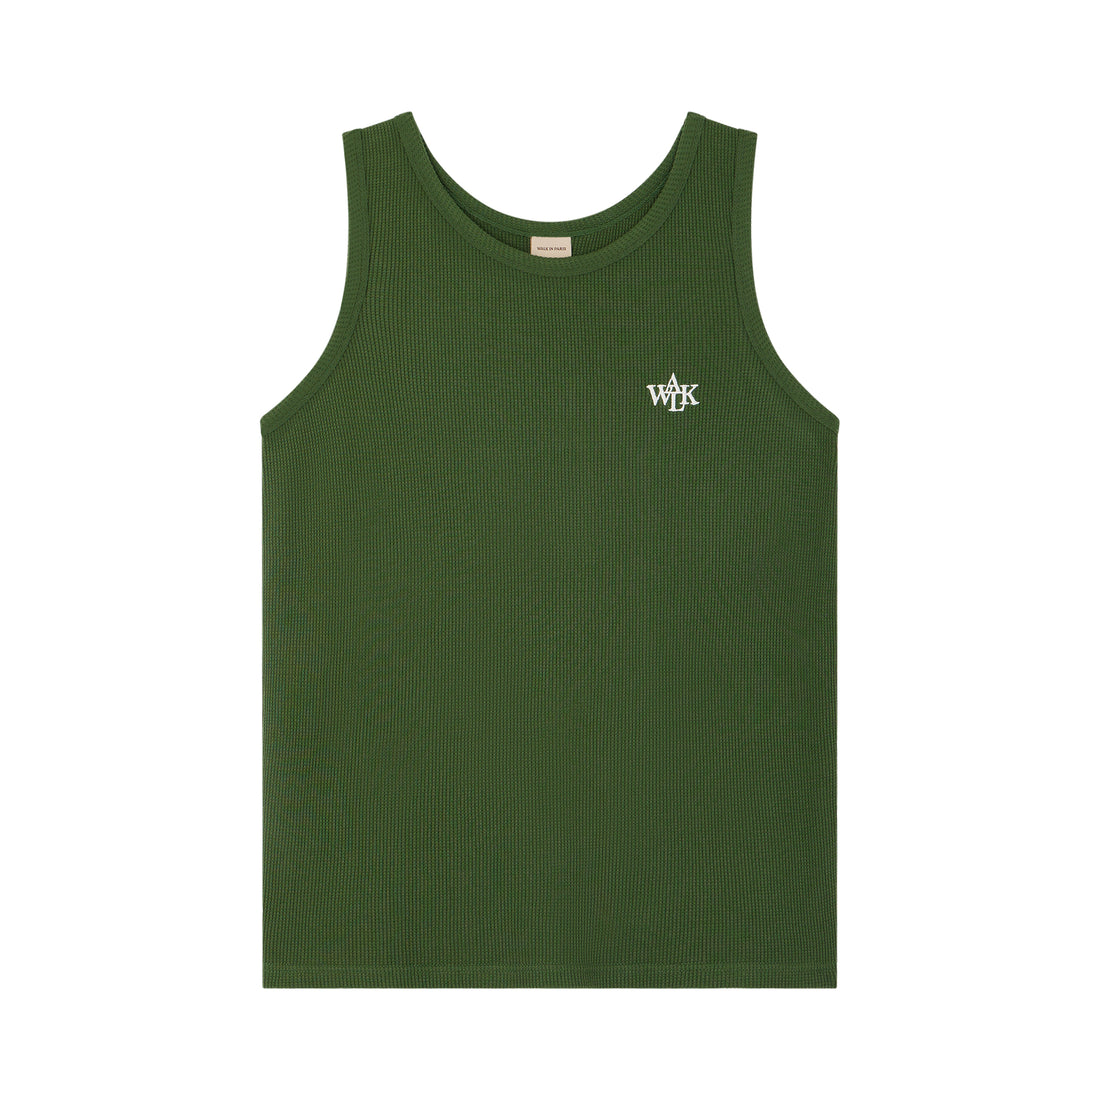 The green embroidered tank top